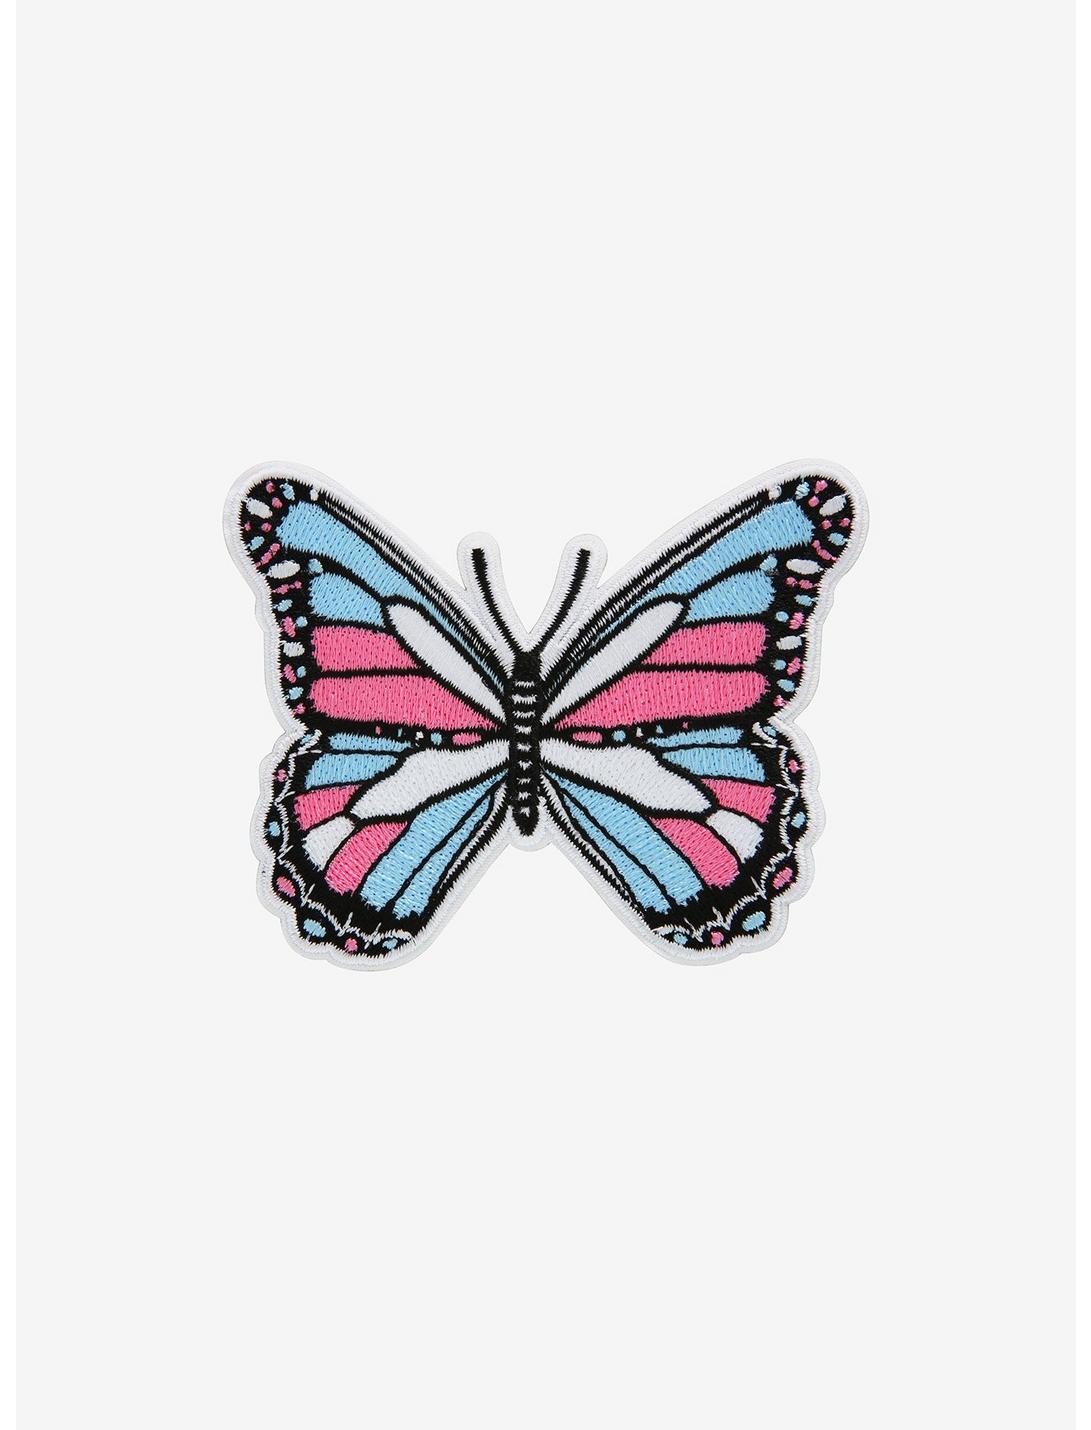 Pink & Blue Butterfly Patch, , hi-res